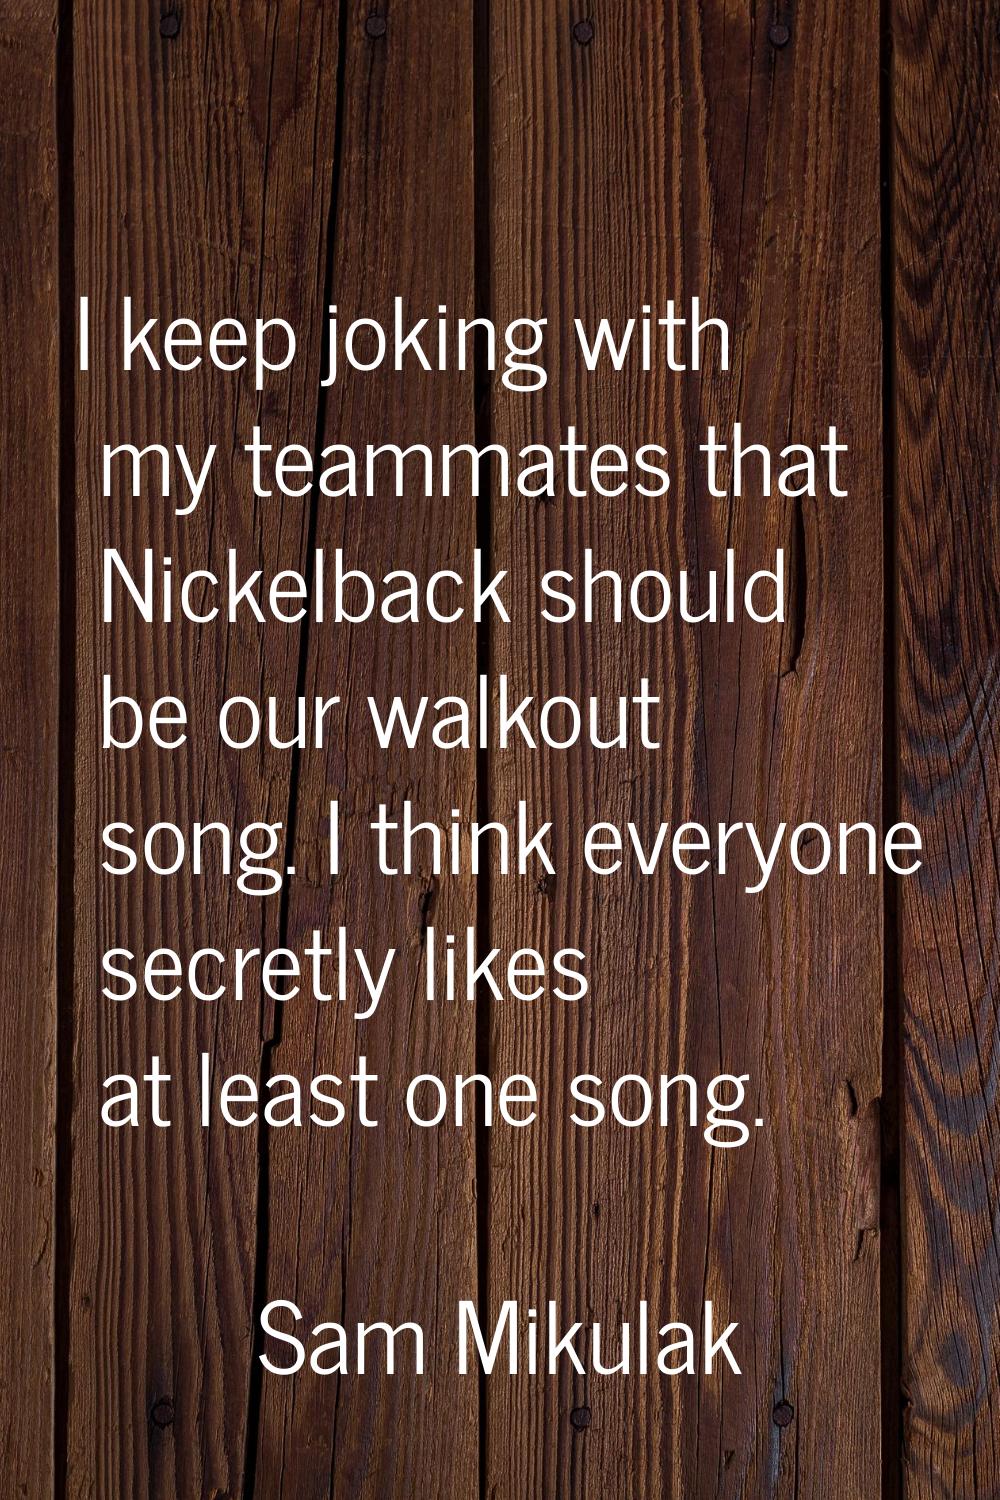 I keep joking with my teammates that Nickelback should be our walkout song. I think everyone secret